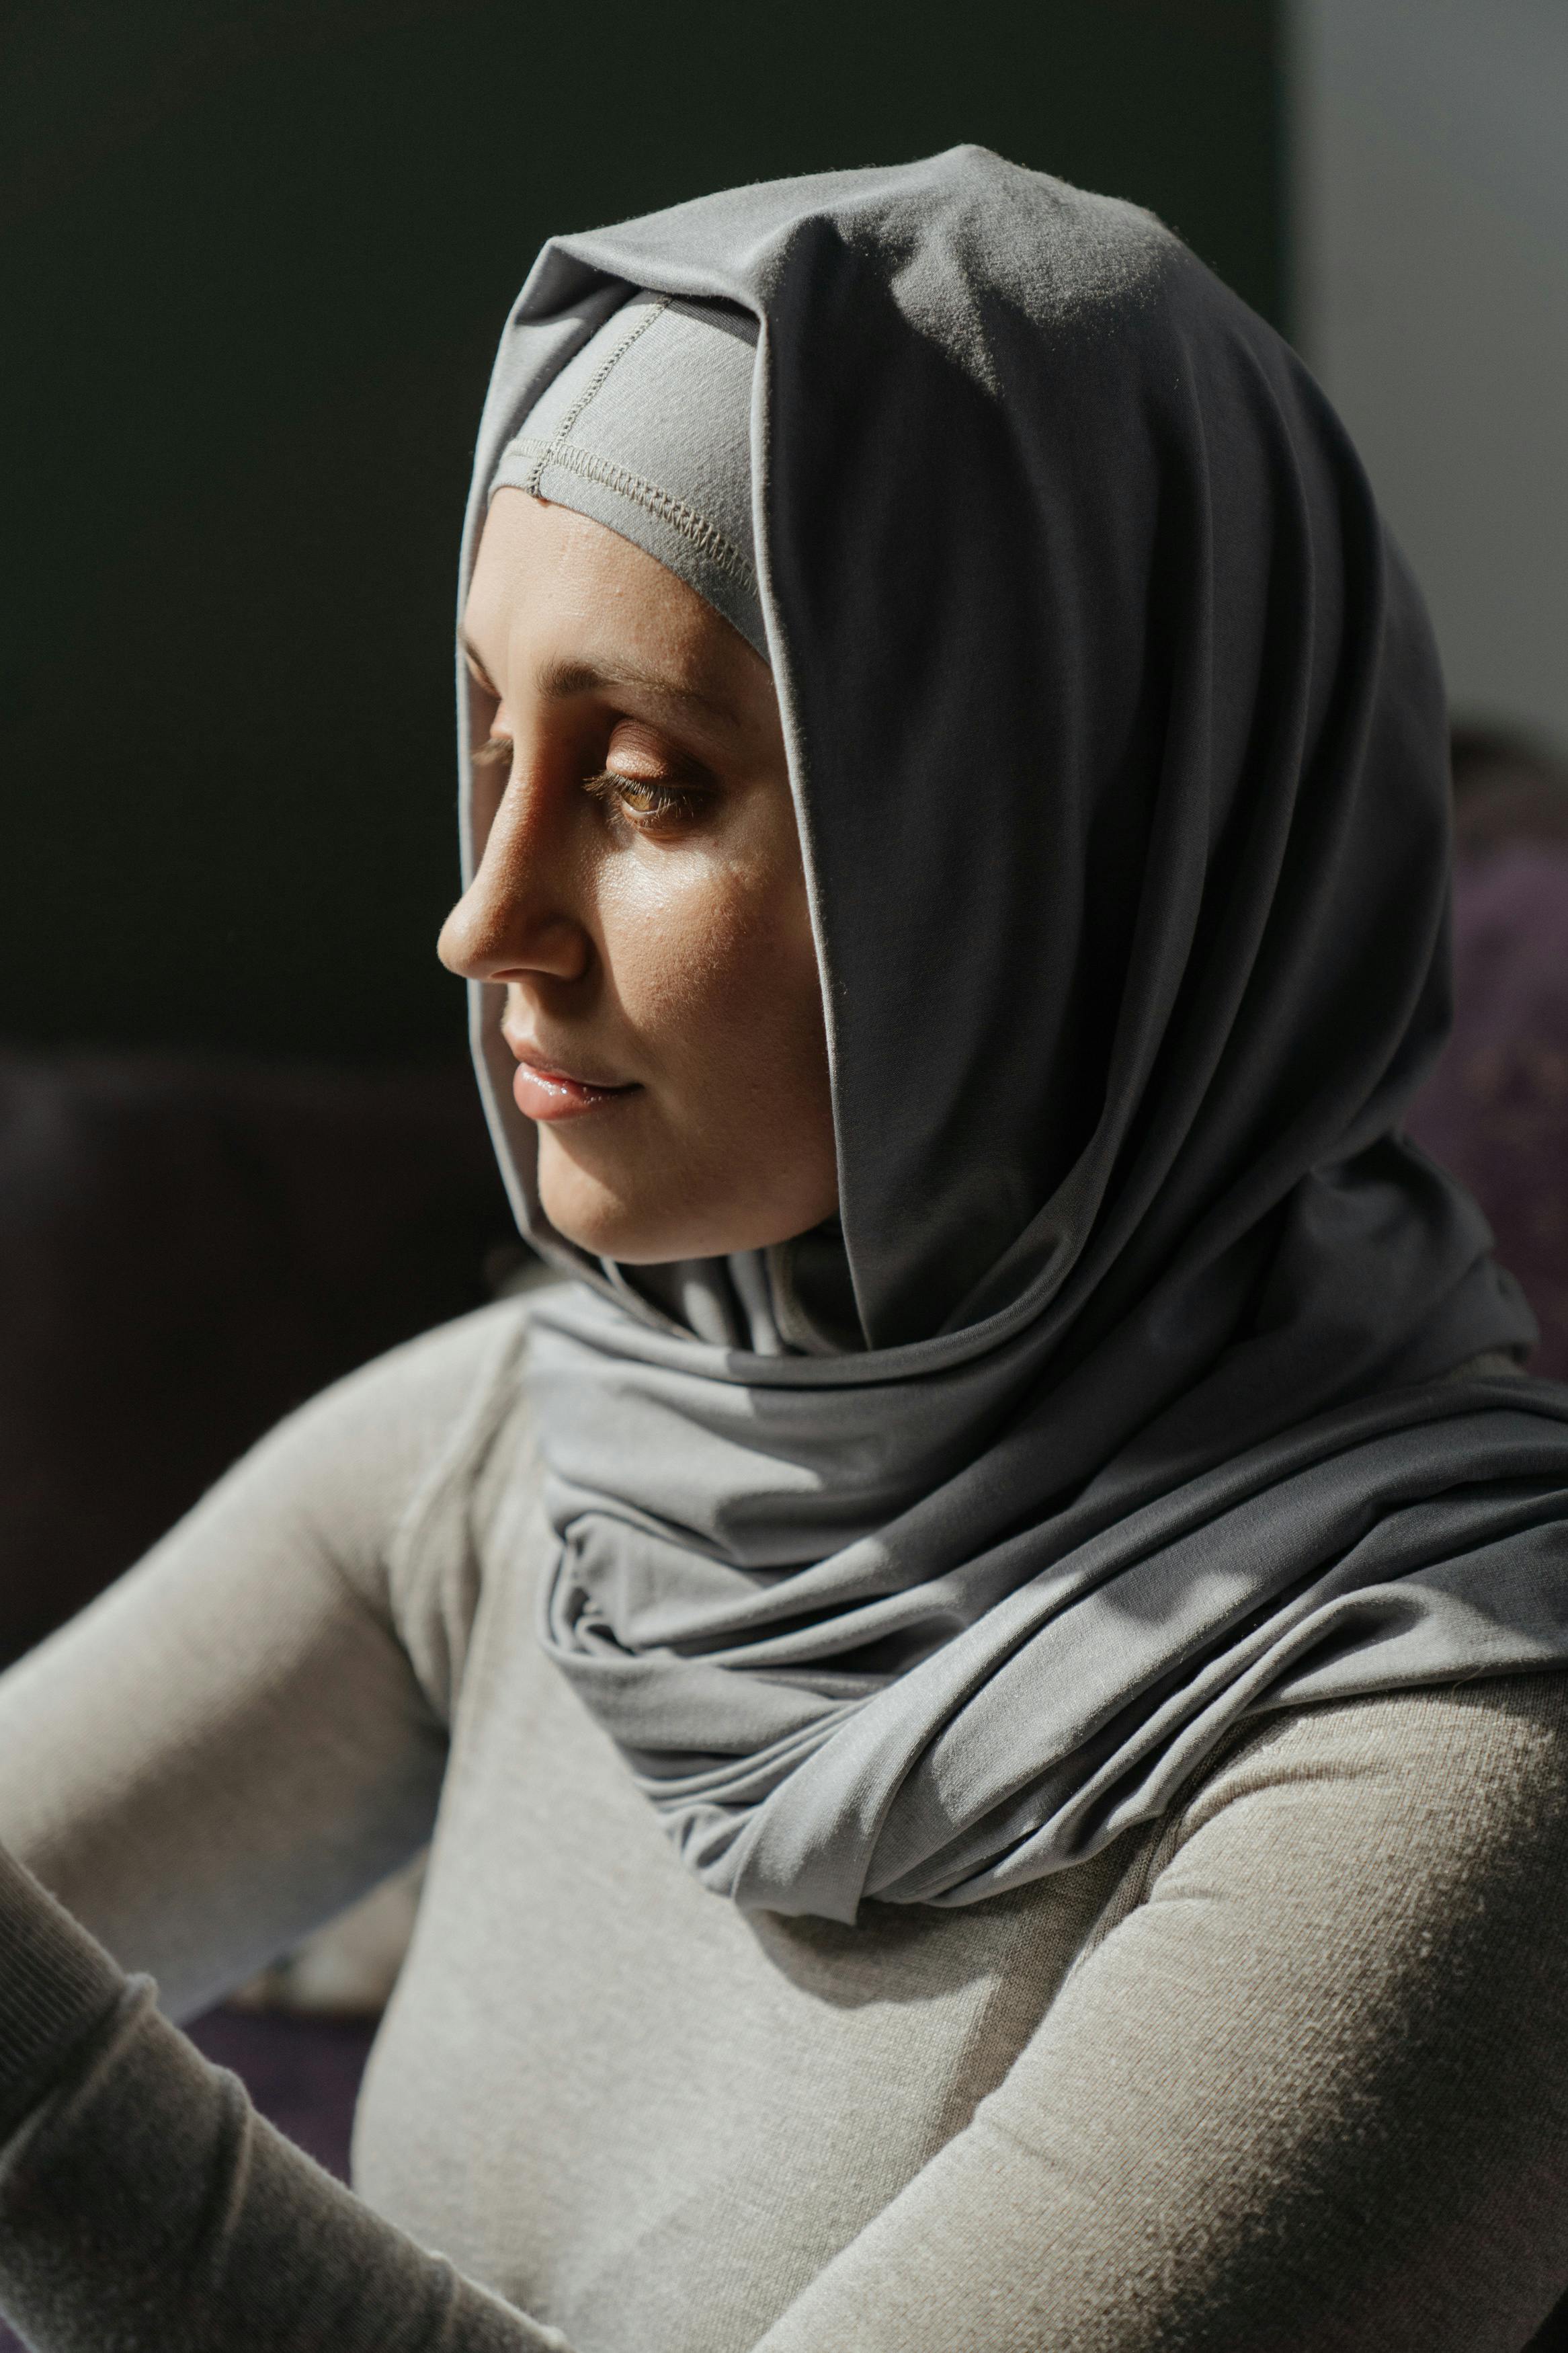 Woman in gray hijab and black leggings sitting on brown wooden